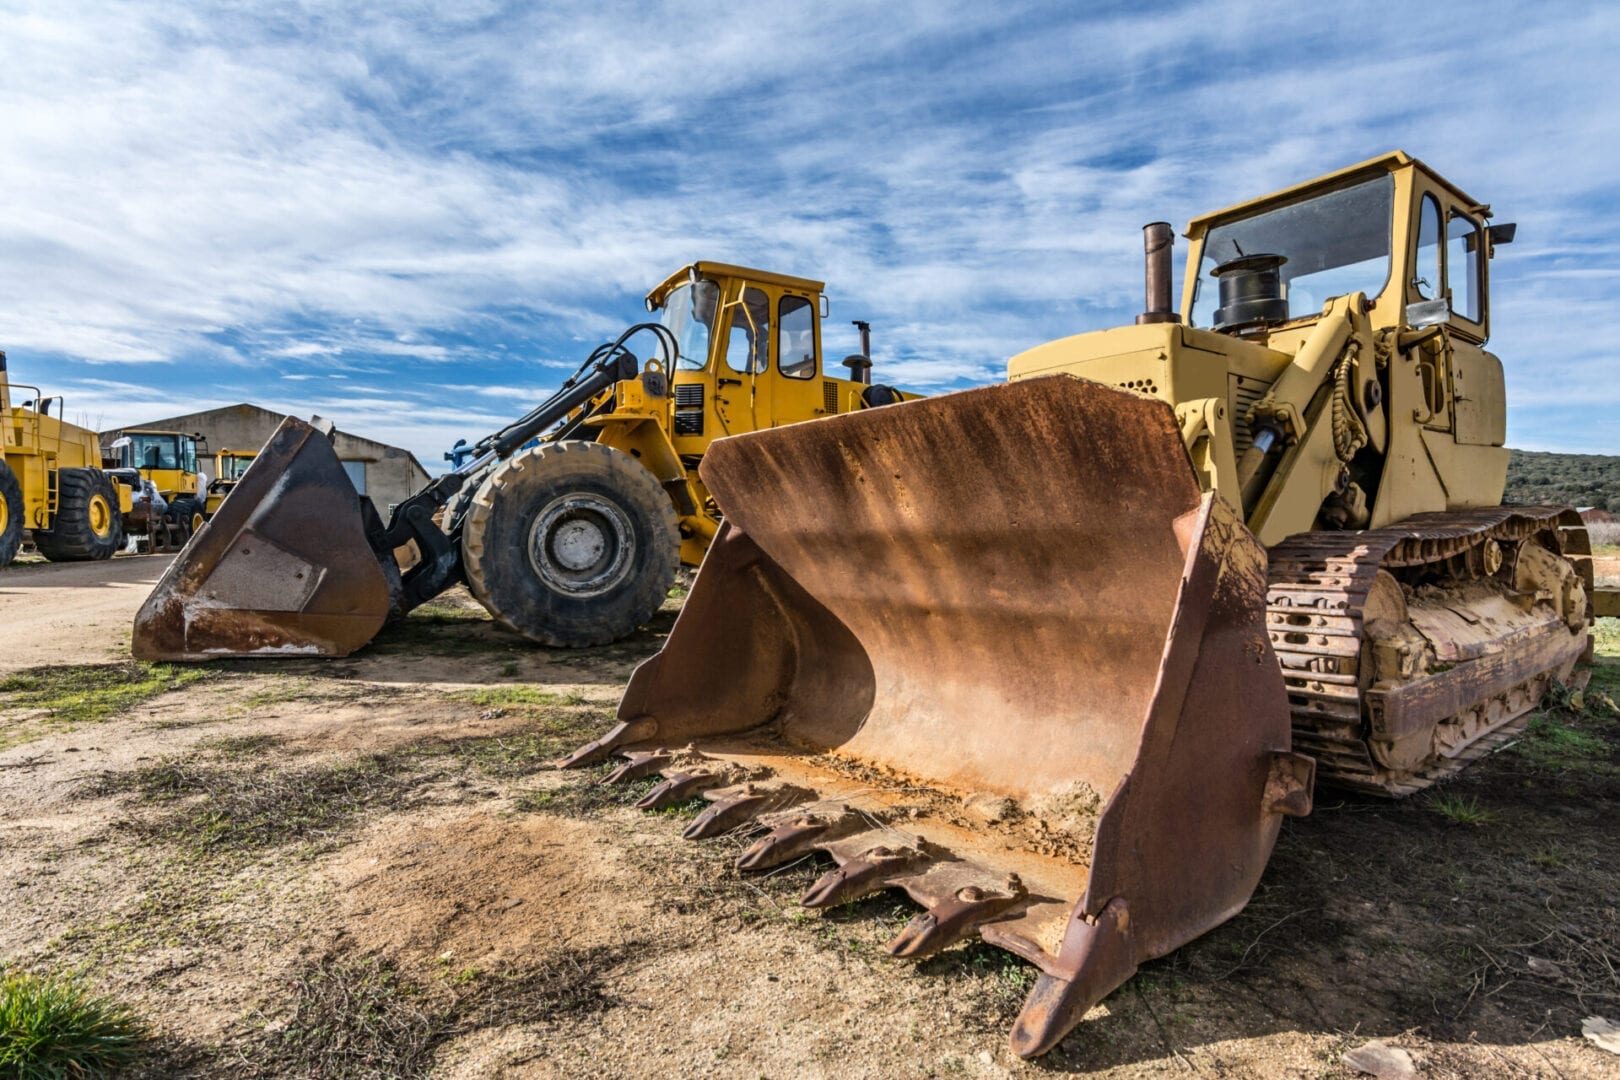 Bulldozer and front-end loader on a construction site.